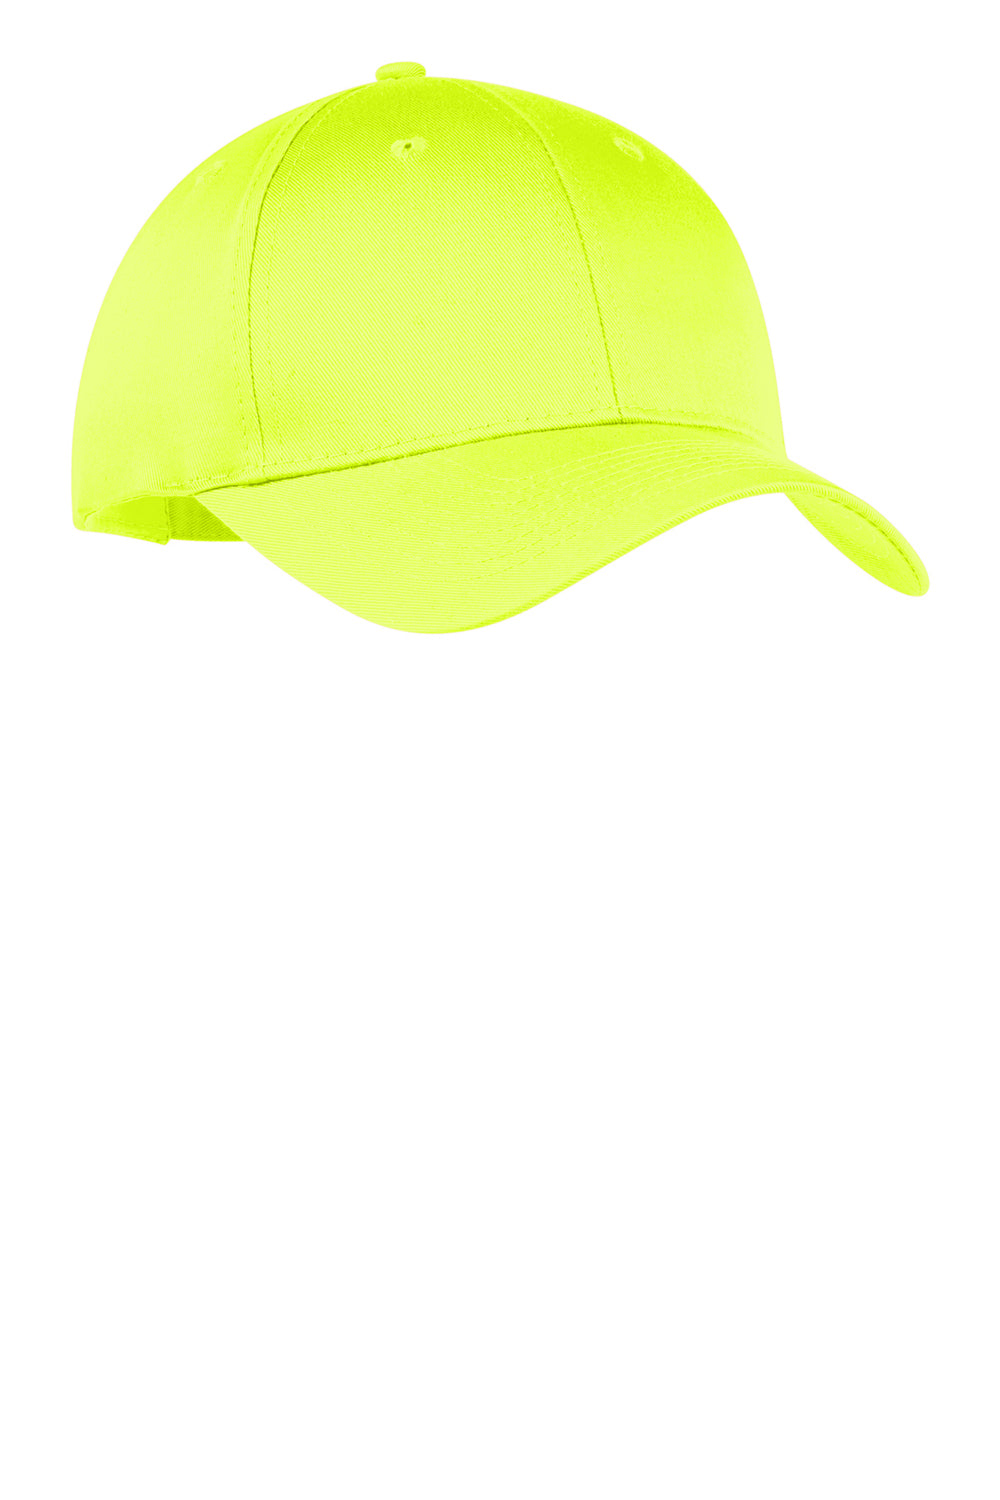 Port & Company CP80 Twill Adjustable Hat Neon Yellow Front